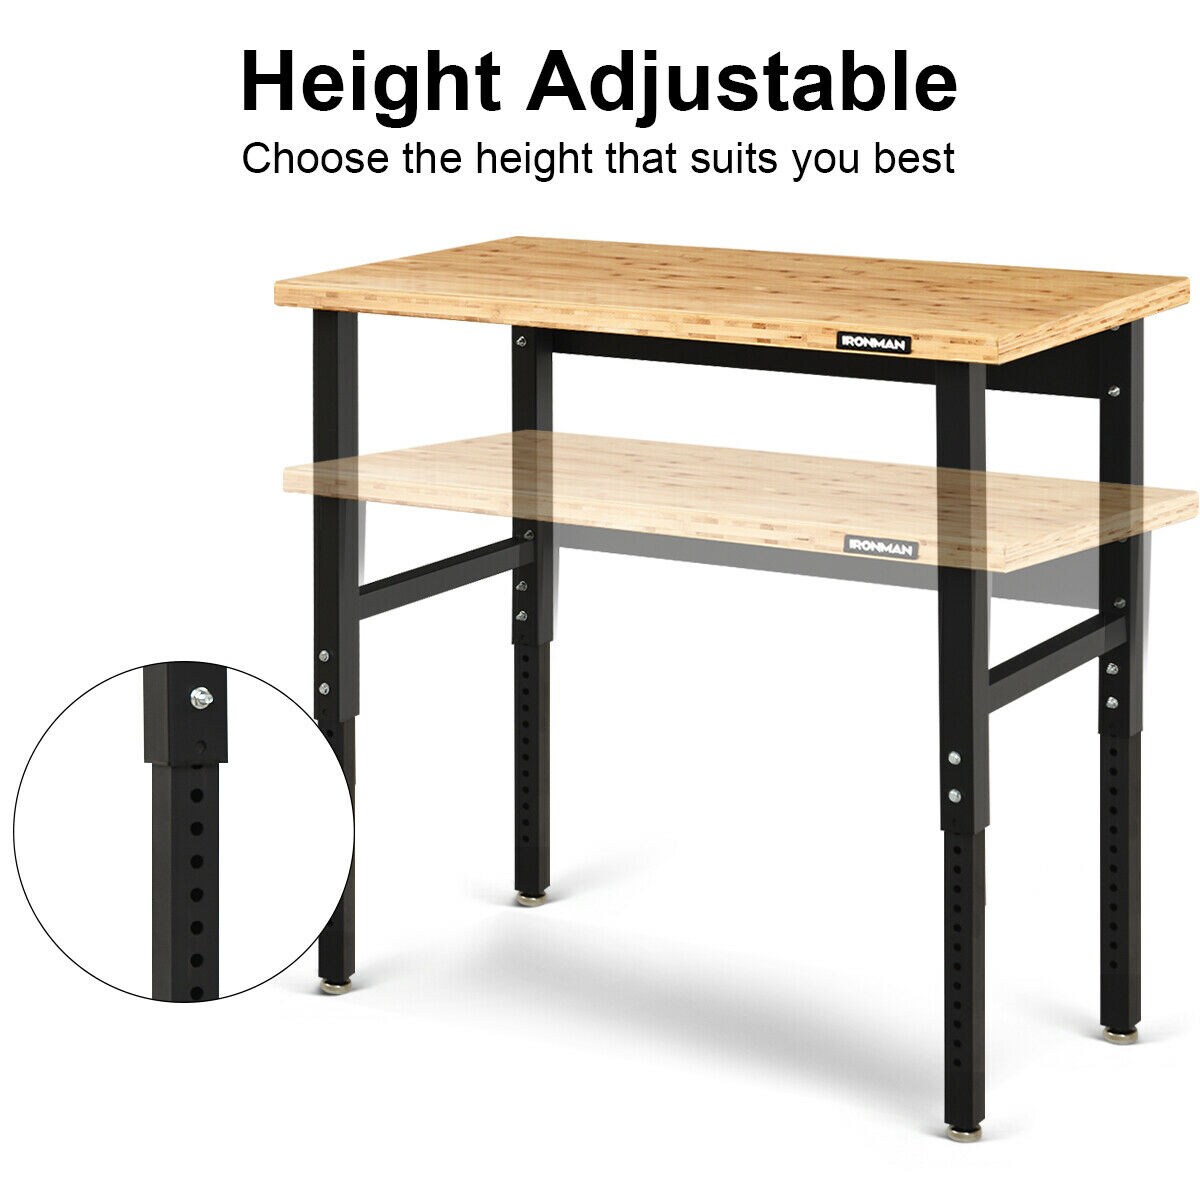 Details about   48" Adjustable Height Workbench Bamboo Top Steel Frame Heavy-duty Garage Stable 